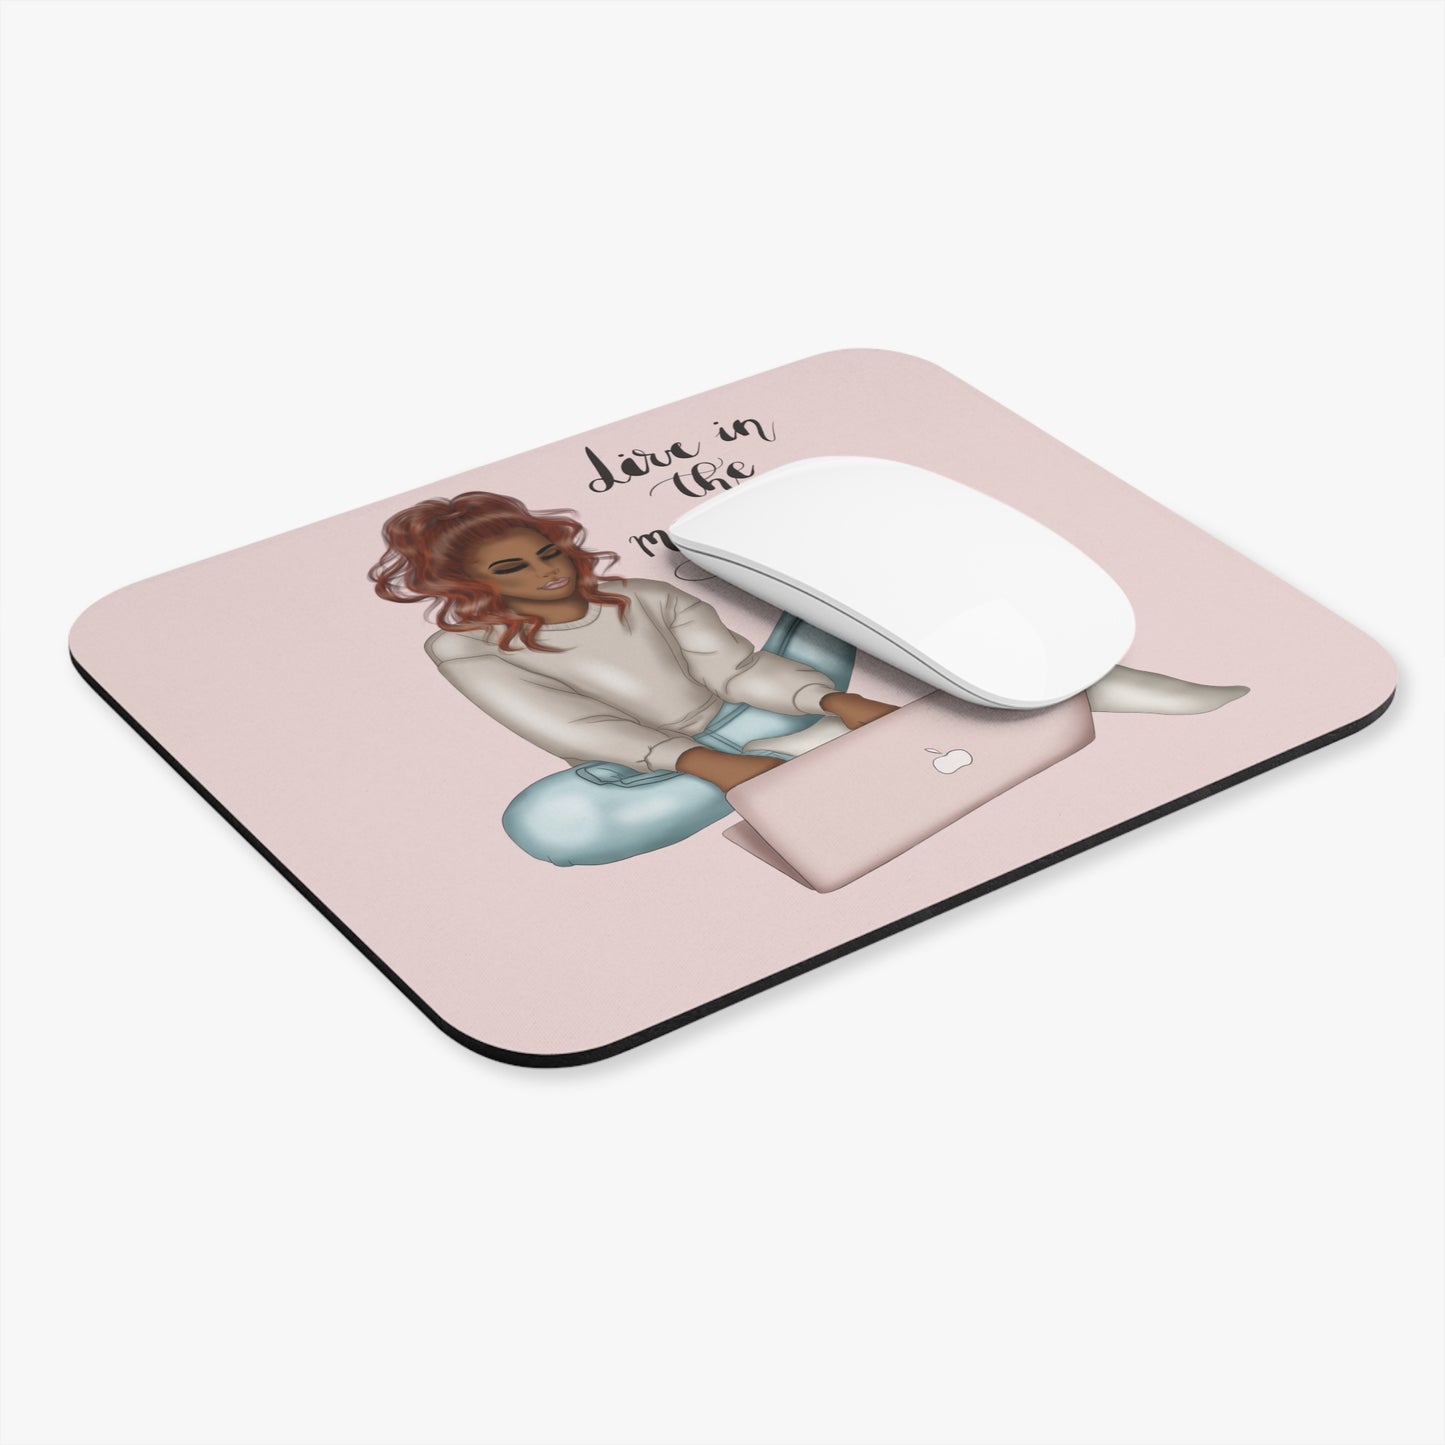 Dive In The Moment Mouse Pad - Brown Hair - Pink